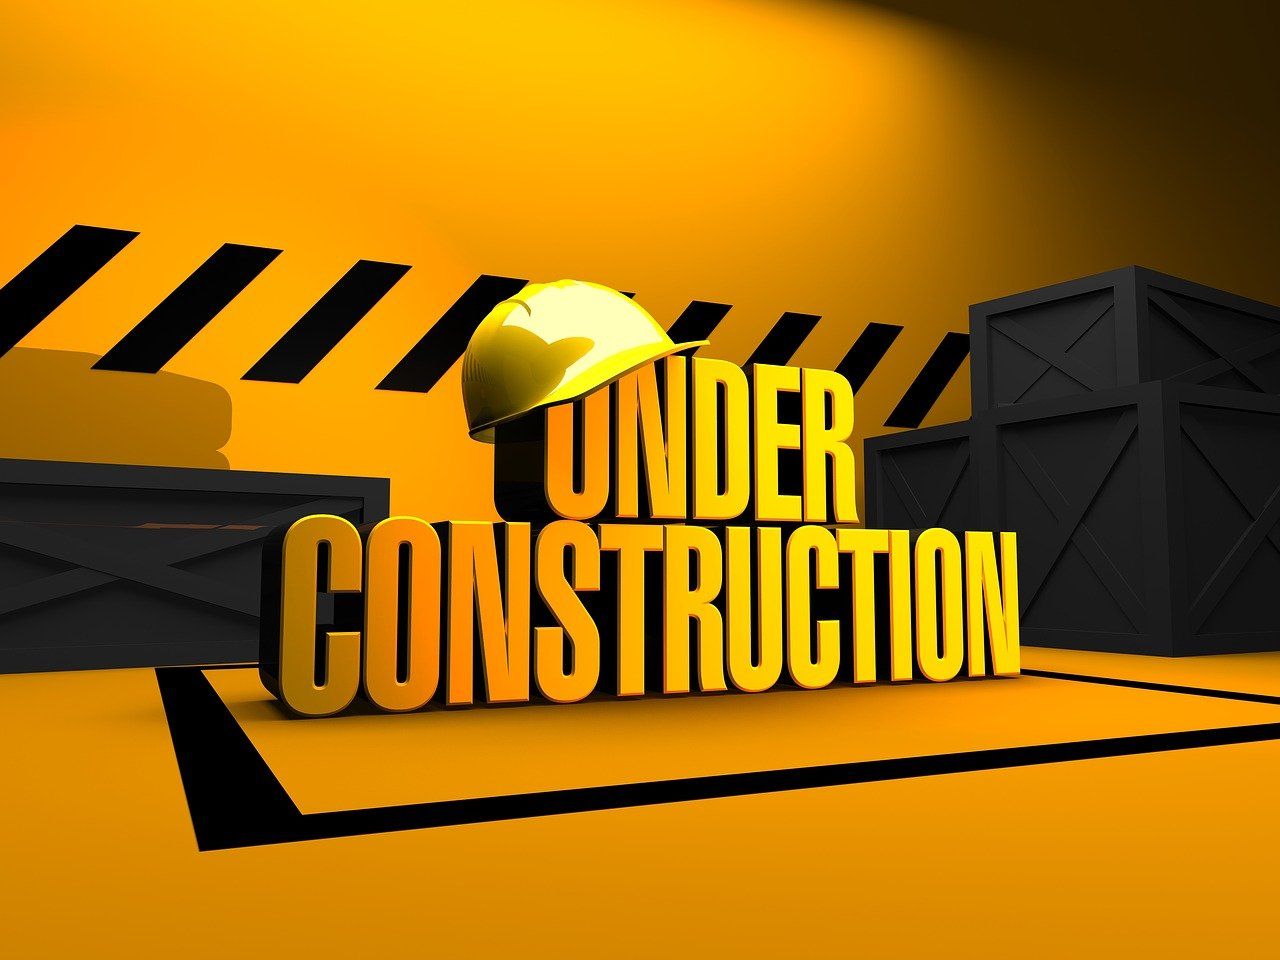 The 3-D words “UNDER CONSTRUCTION” appear in front of some crates in a large yellow space, with a giant yellow hard-had perched on top of the letters.